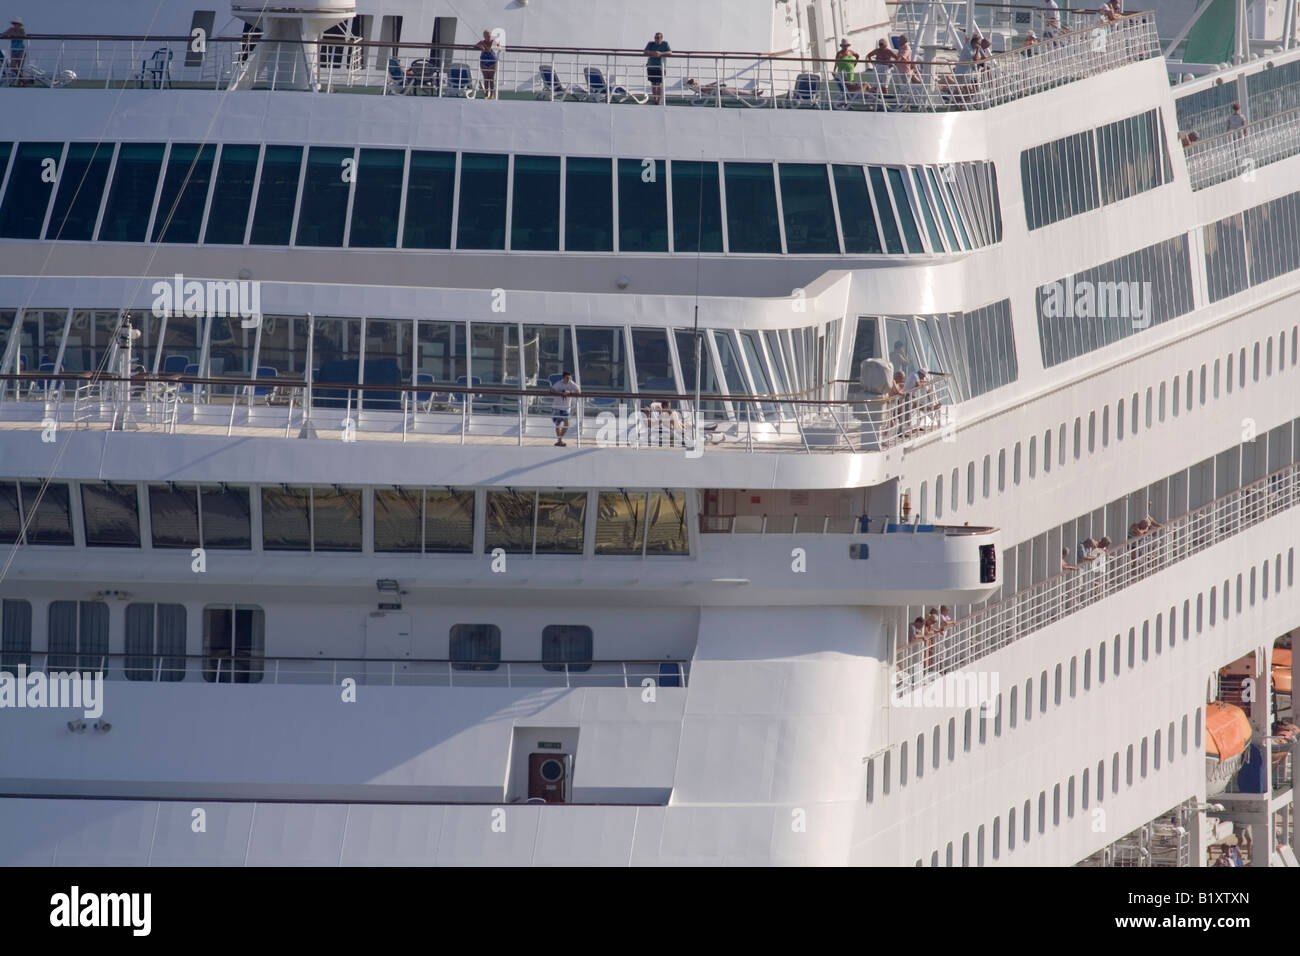 Cruise ship superstructure with passengers relaxing on board Stock Photo